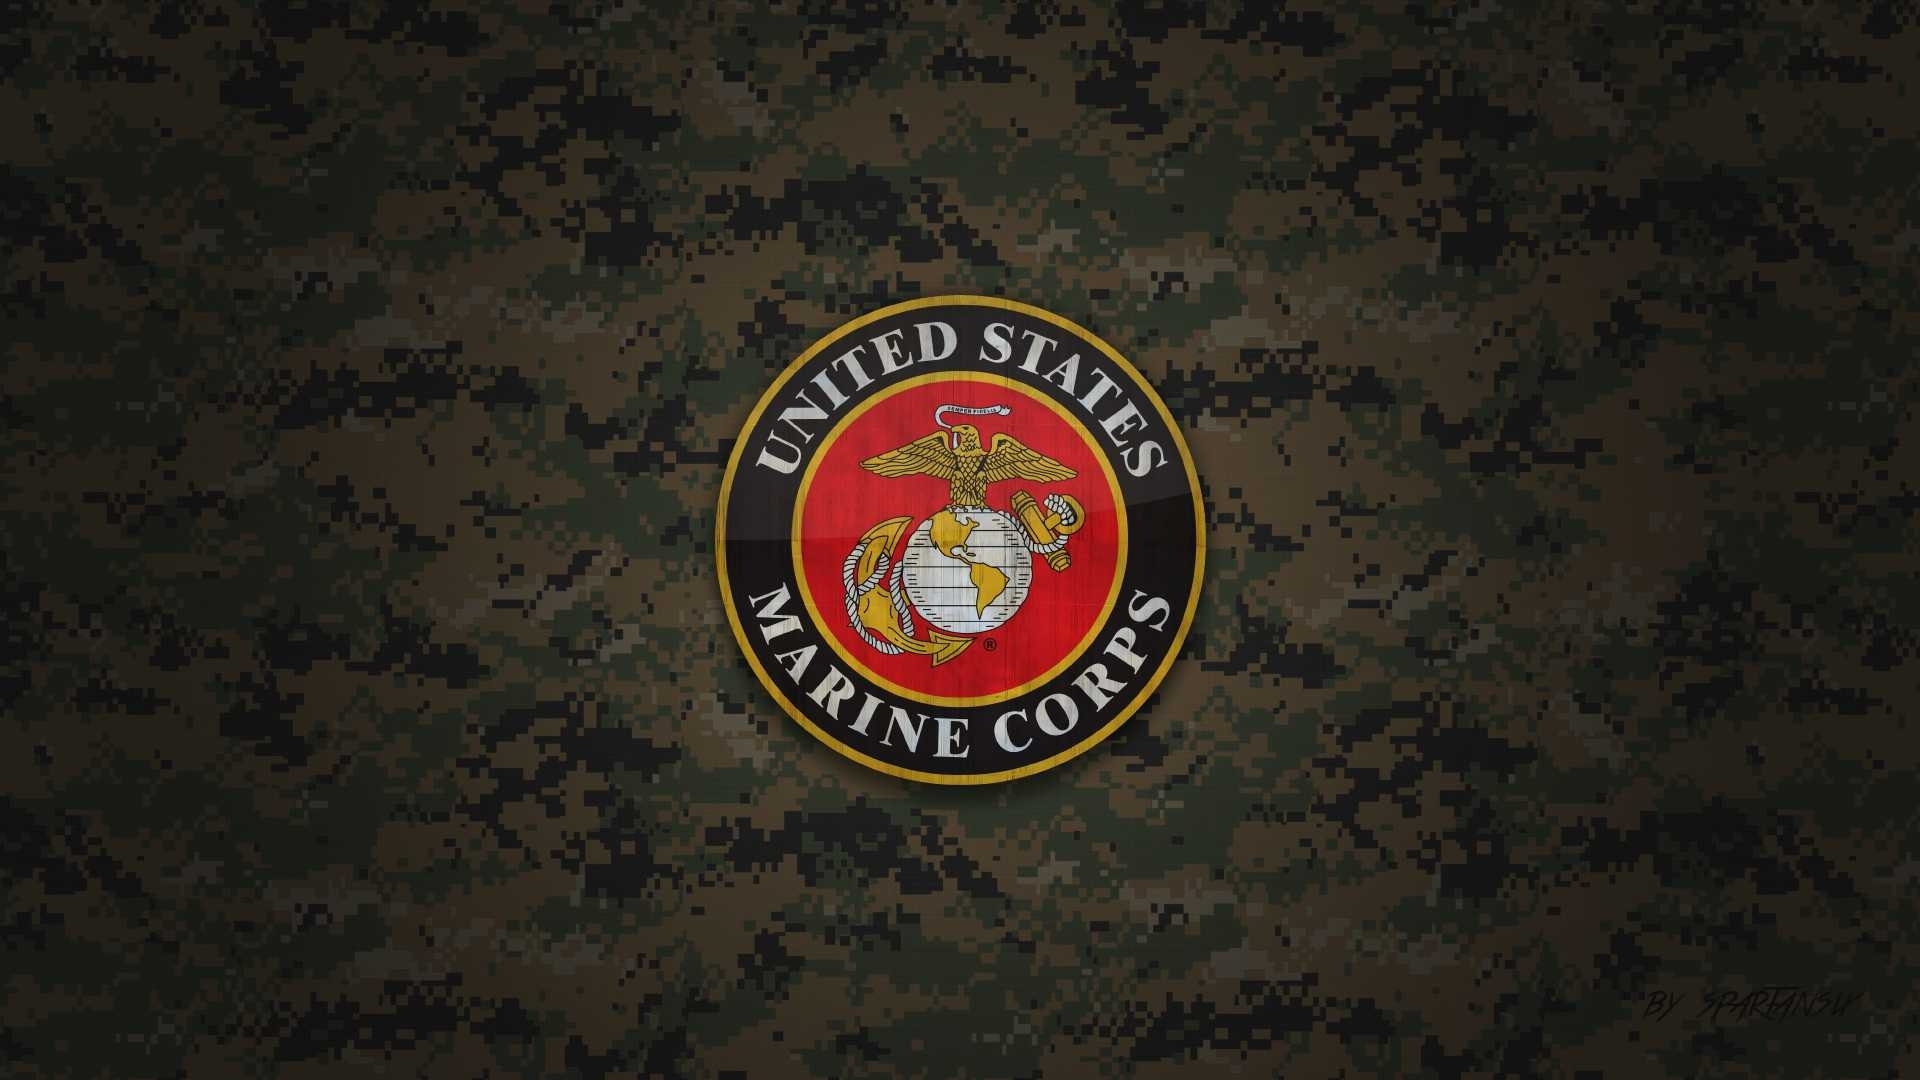 10 Best Marine Corps Hd Wallpaper FULL HD 1920×1080 For PC Background 2020